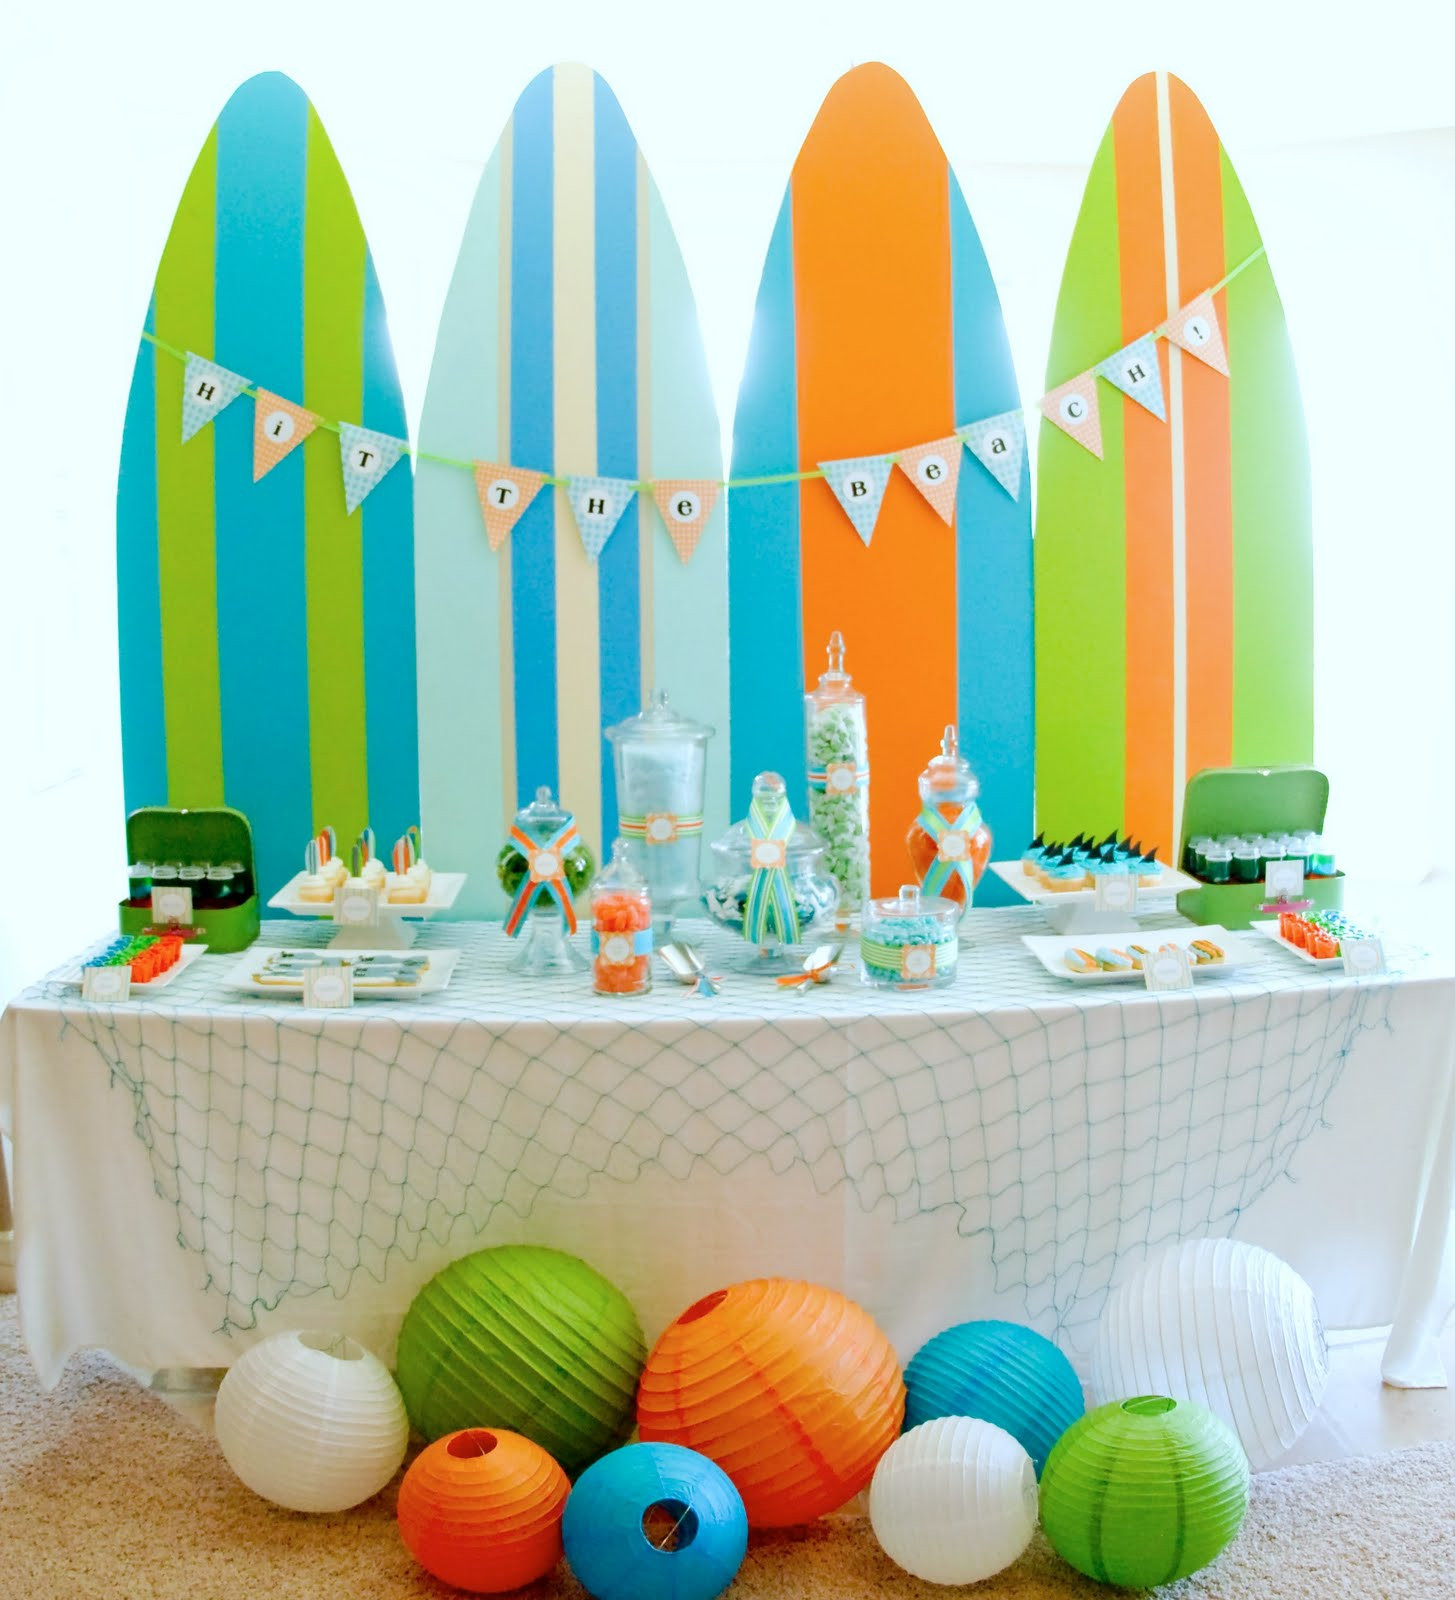 Pool Party Ideas
 Kara s Party Ideas Surf s Up Summer Pool Party